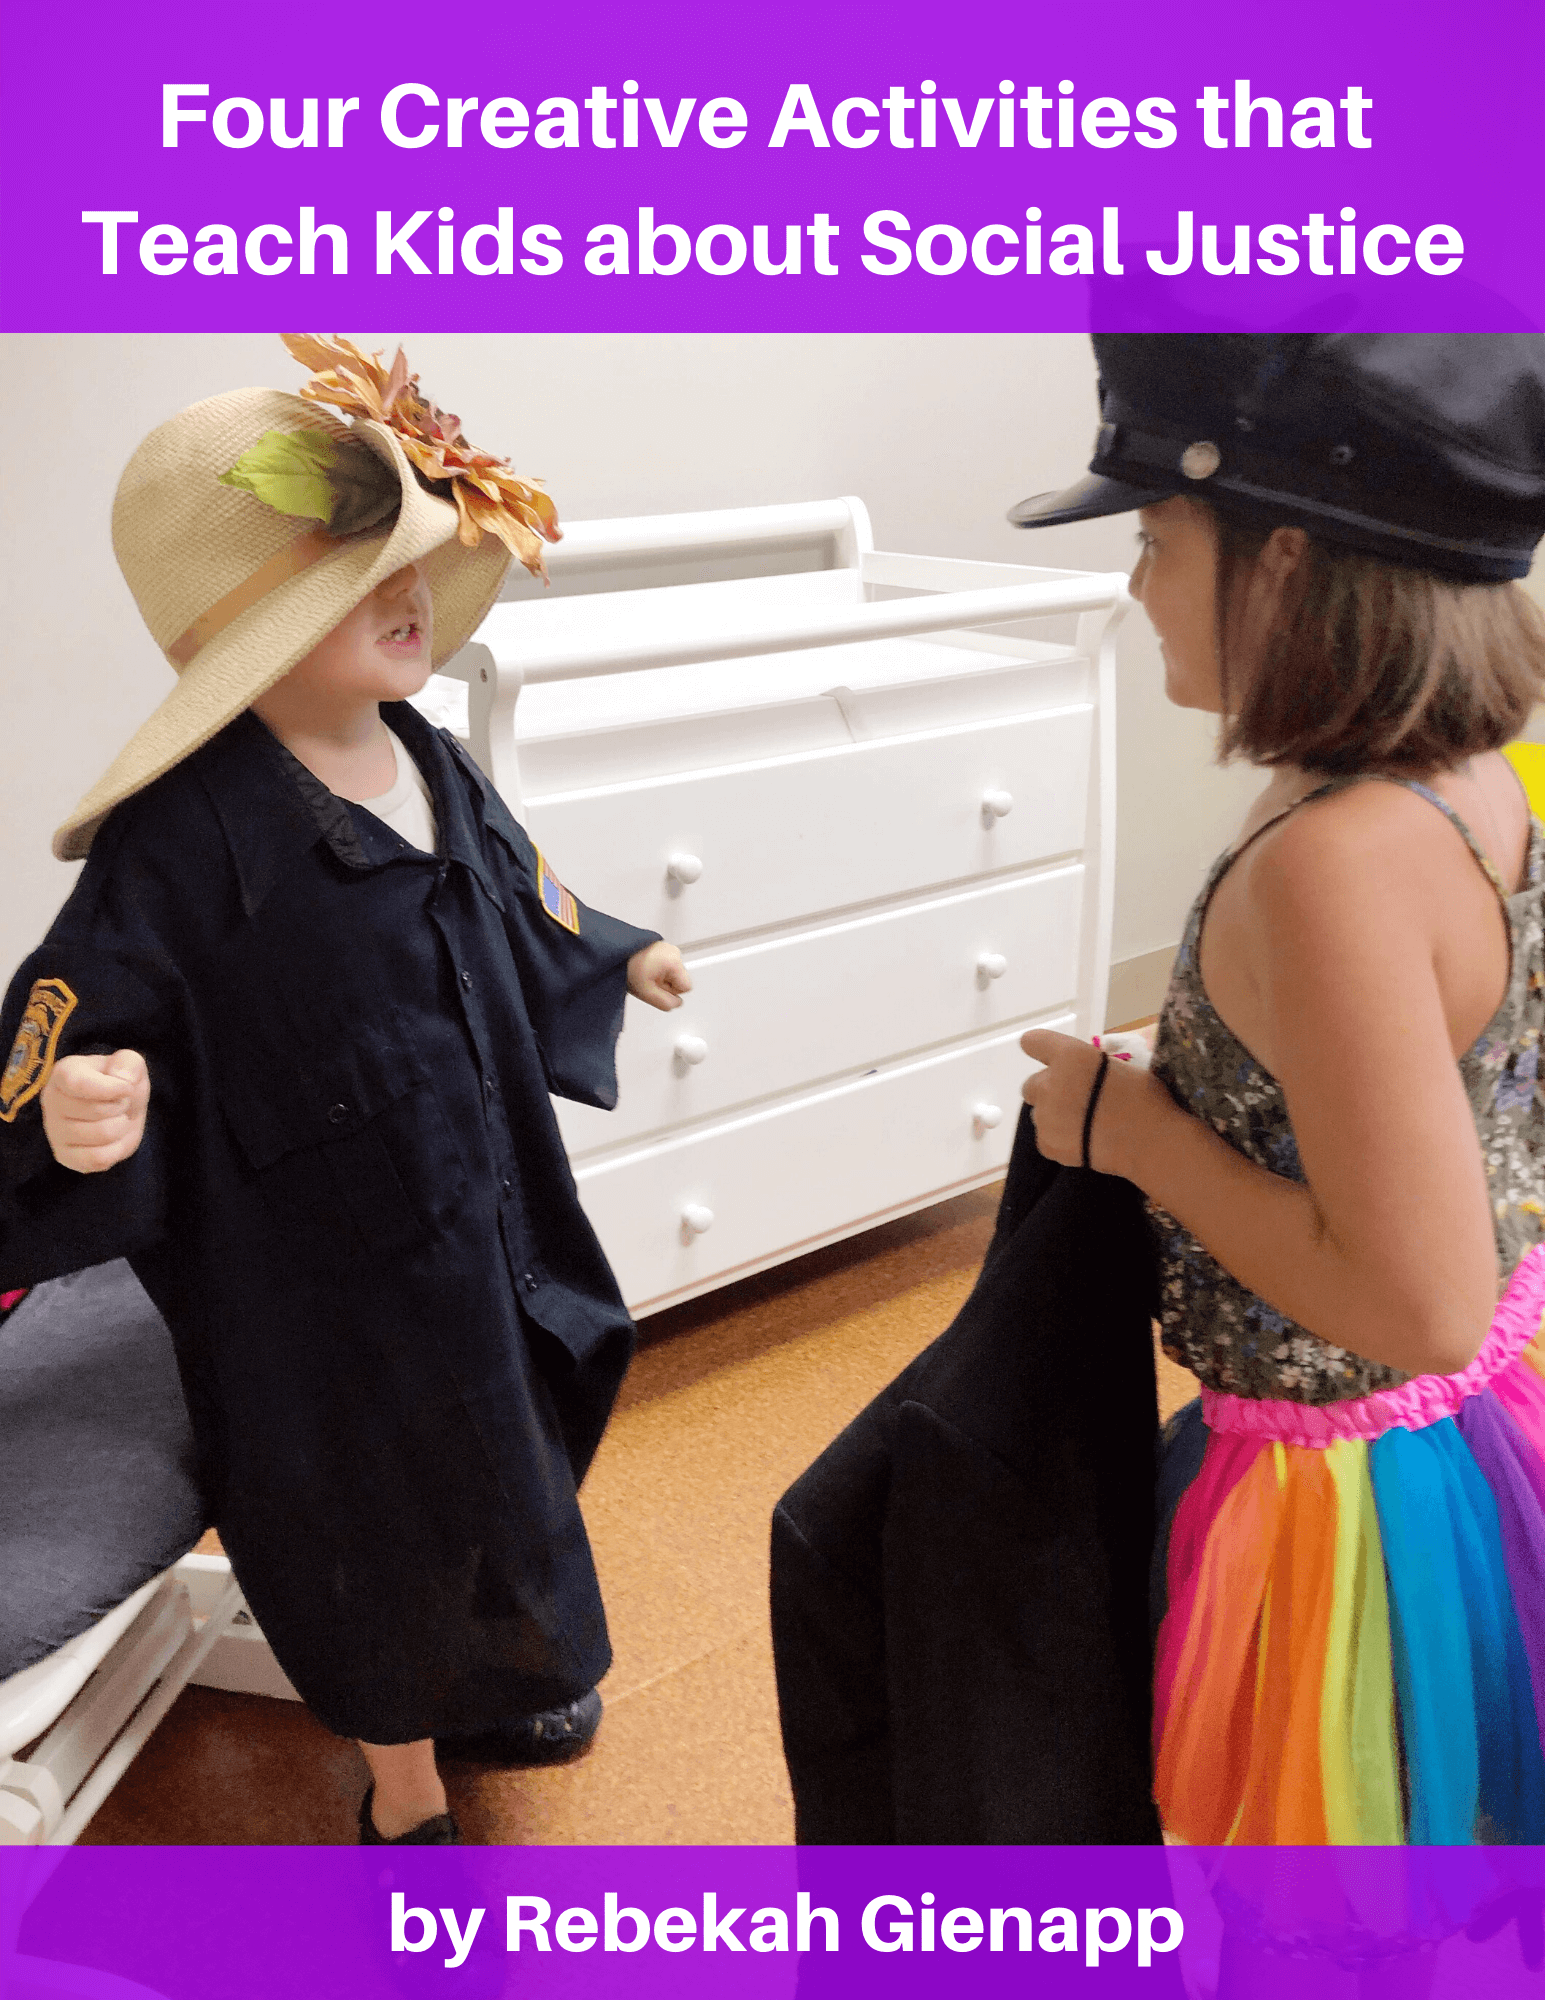 Grab four of my tried and true lesson plans that teach kids about justice through the arts, music, and dramatic play.